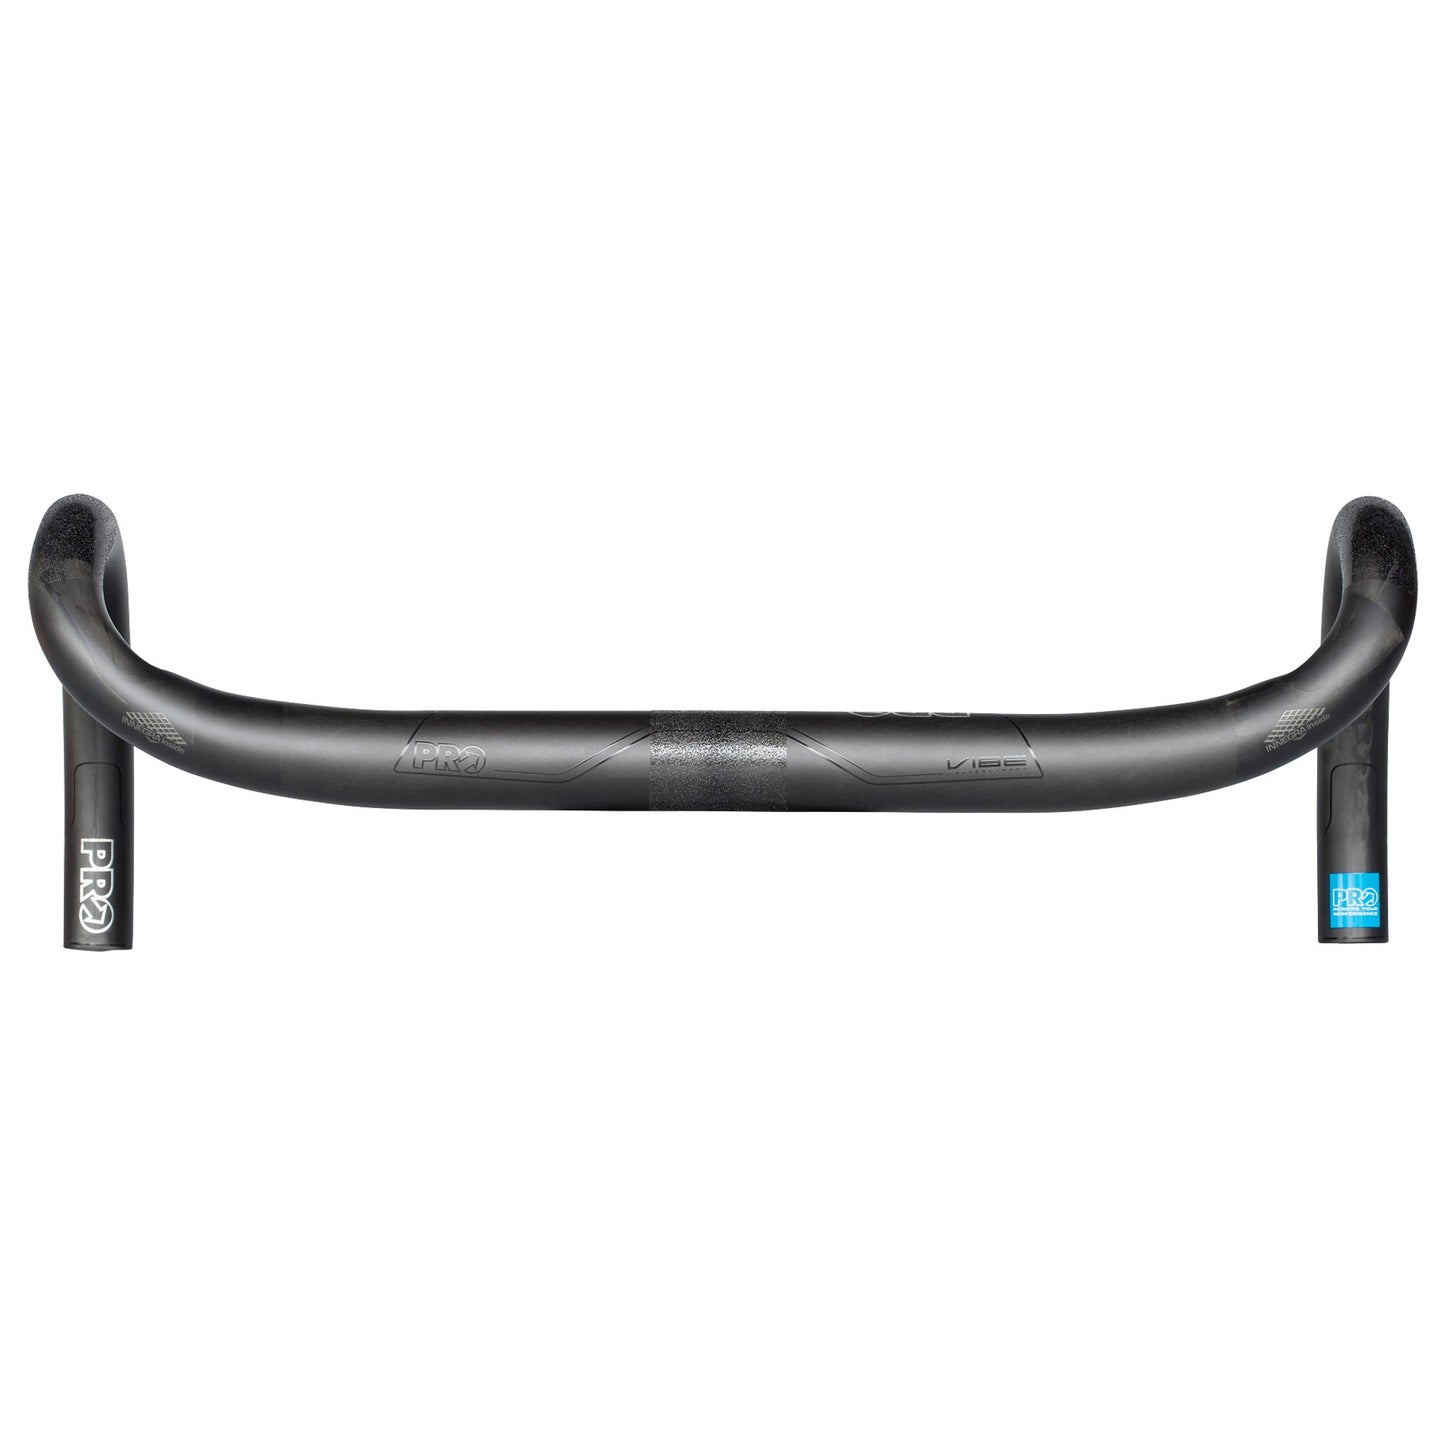 PRO Vibe SL Carbon Compoact Road Bars - 42cm Di2 Integration buy now at Woolys Wheels Sydney with free delivery